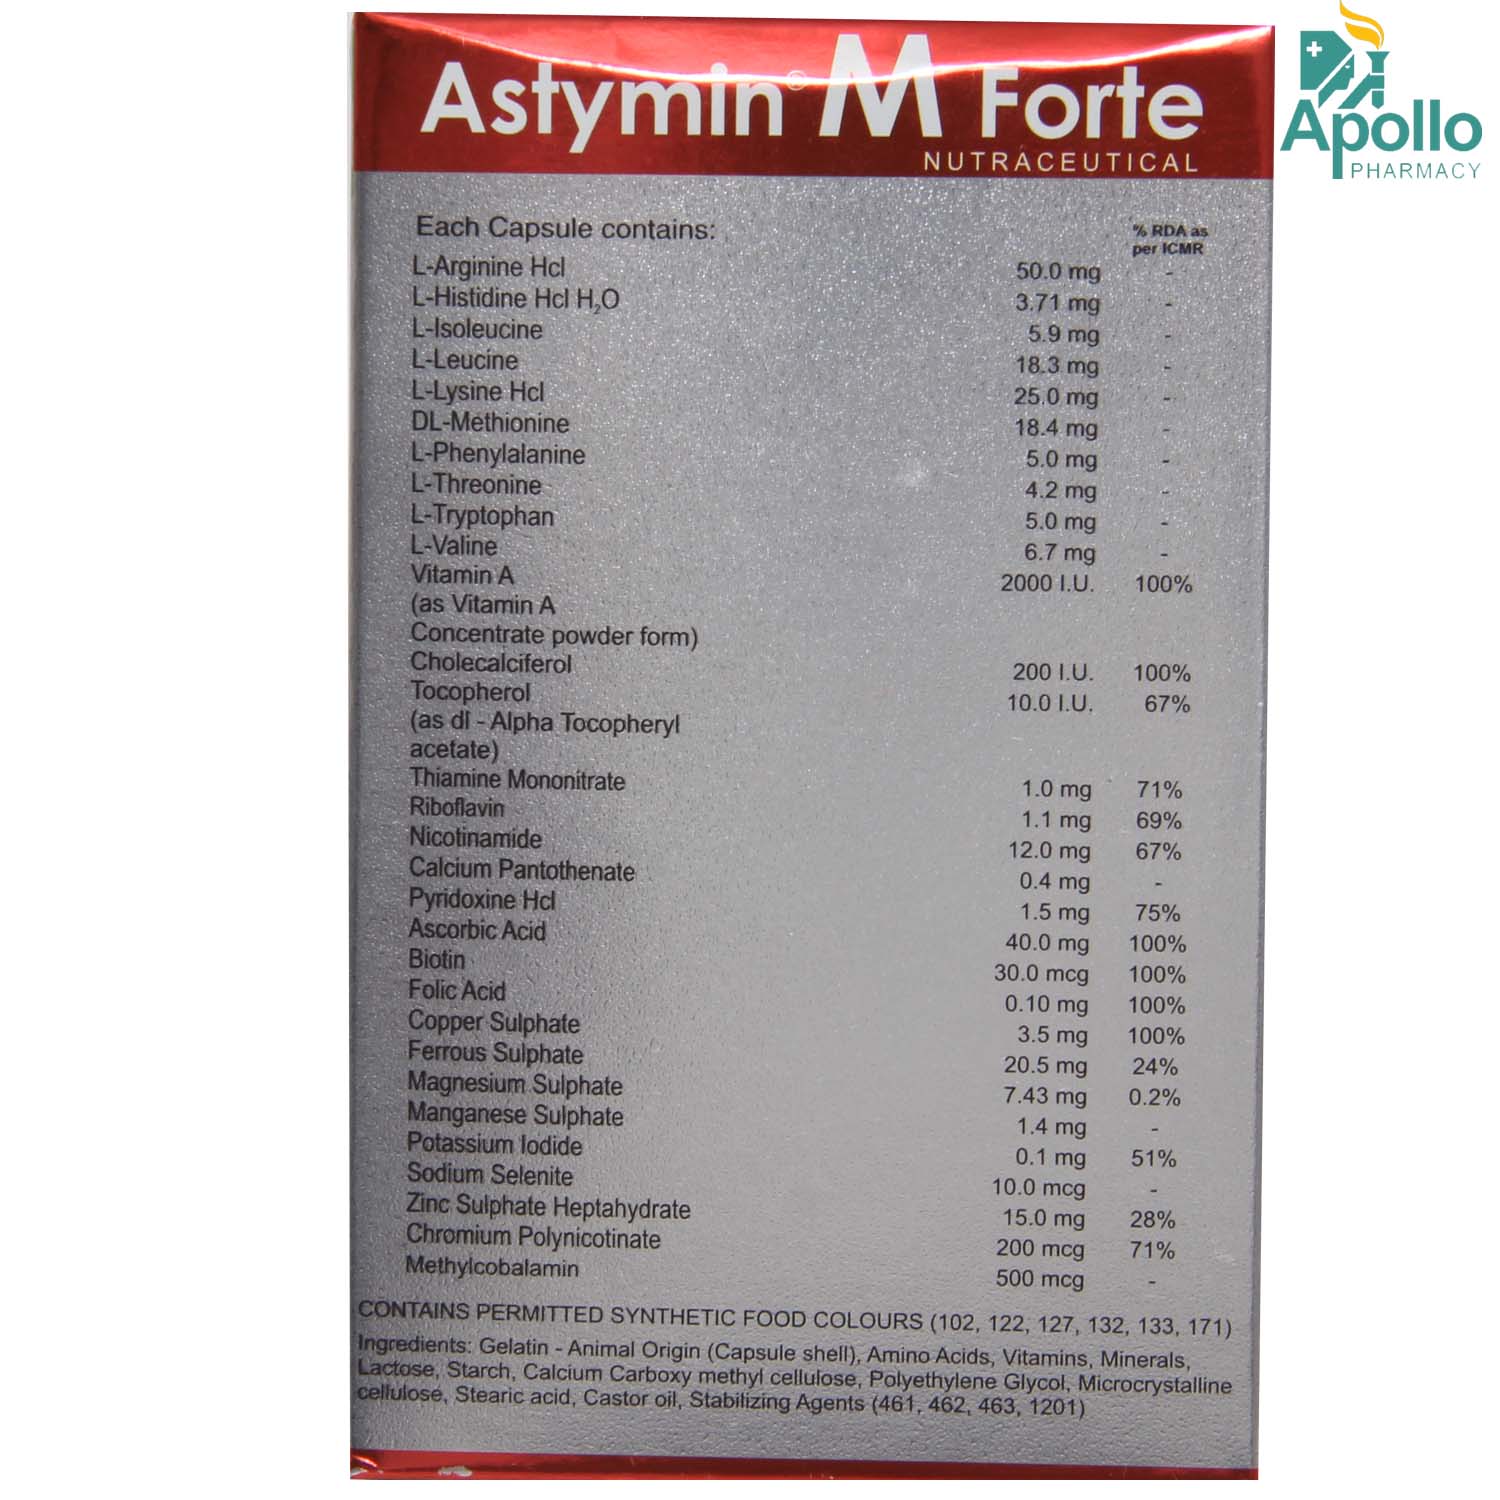 Astymin M Forte Capsule 30's, Pack of 30 S